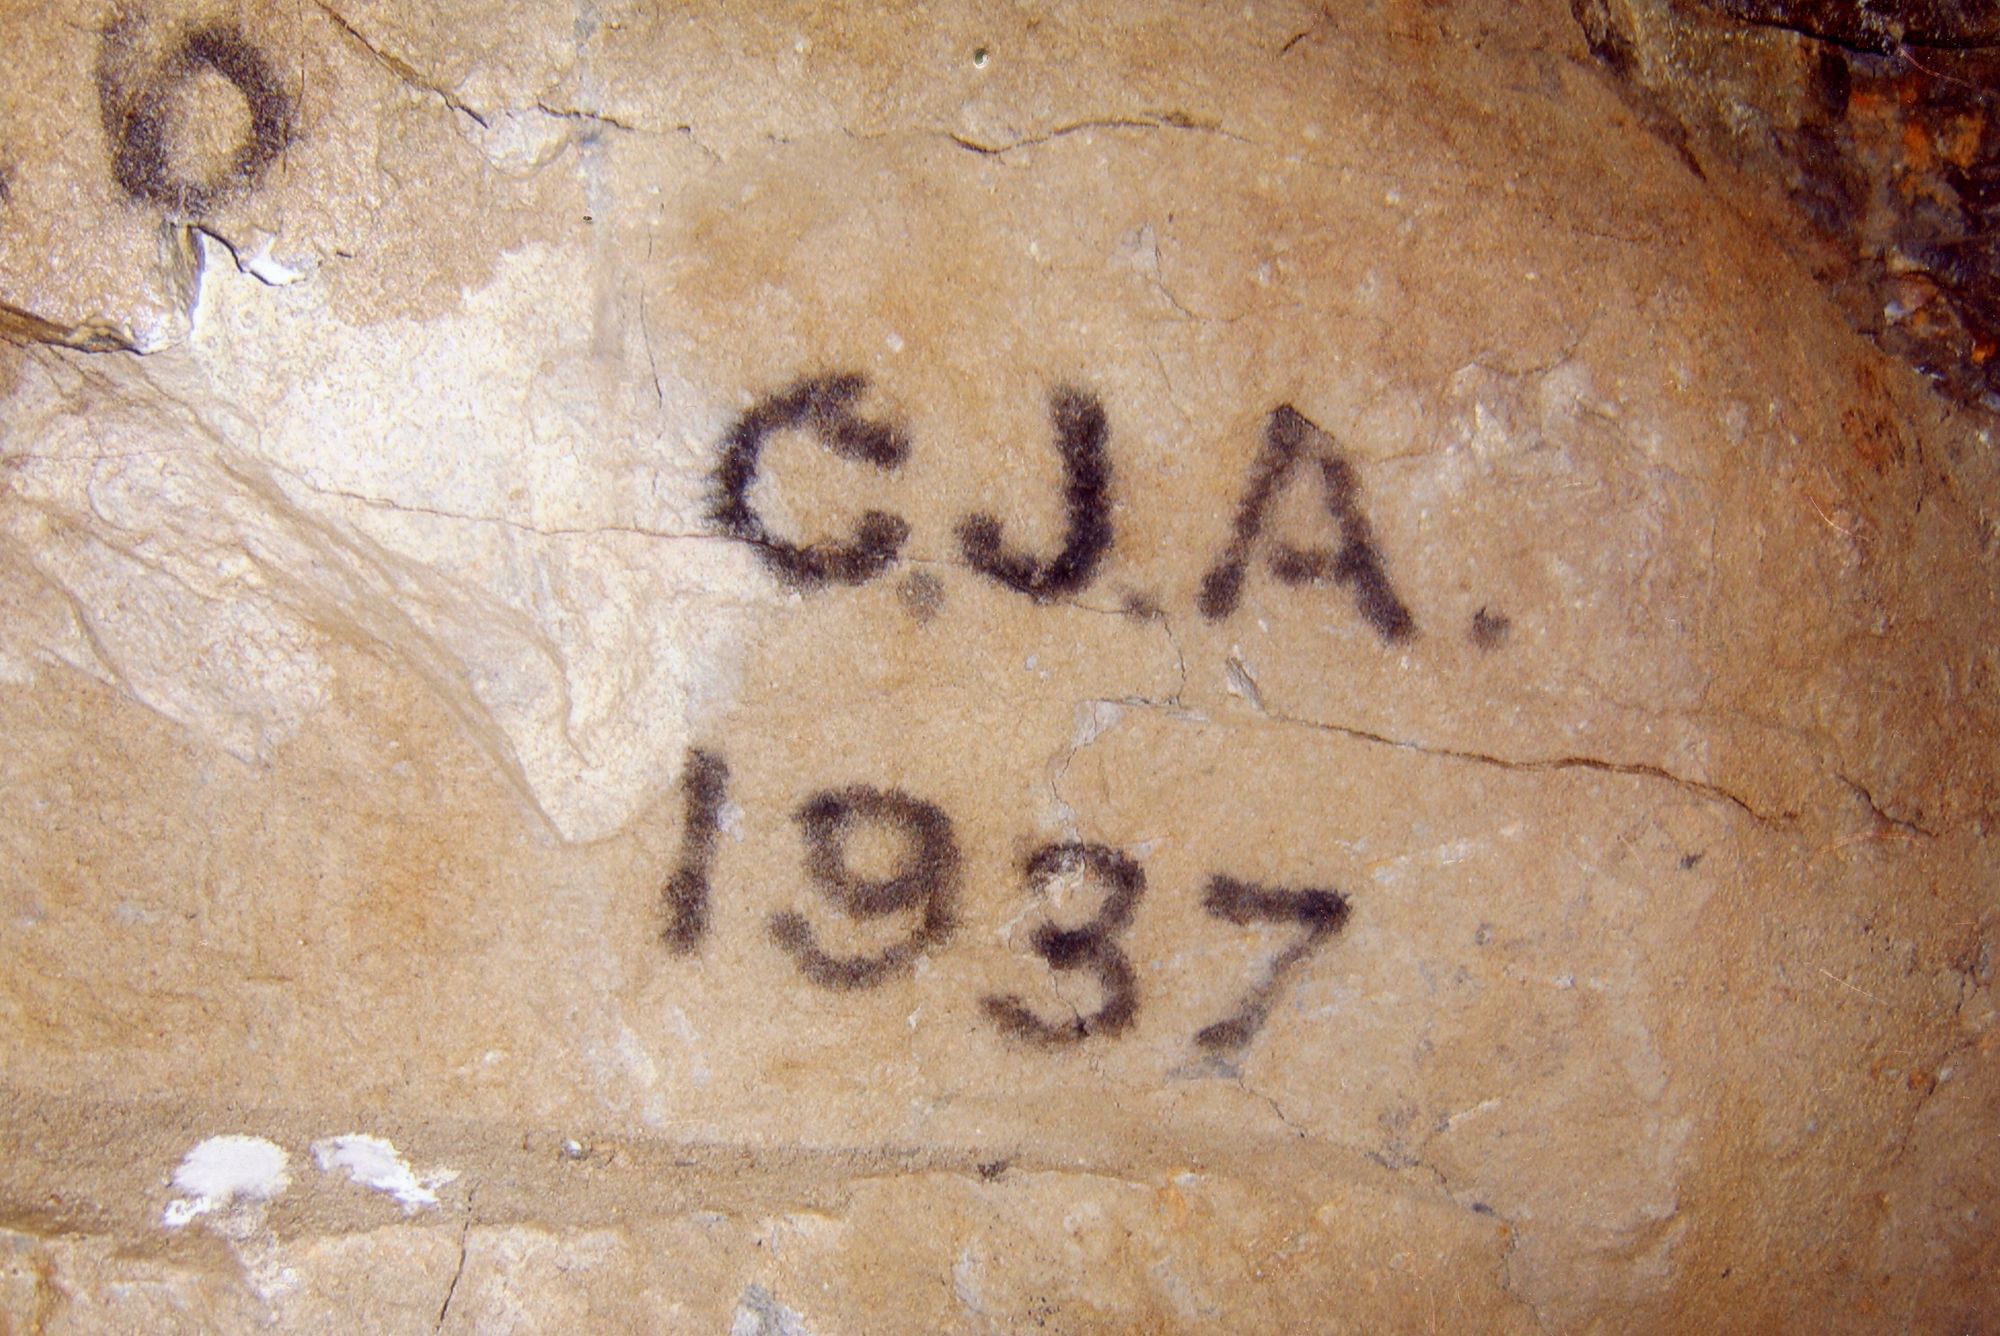 Underground at the Colorado Mine in the Alleghany District. Charlie Ayers was a mining engineer at this mine in the 1930s. Just as they are today, initials were the most common thing drawn. Photo by geologist Raymond Witkkopp 2006.